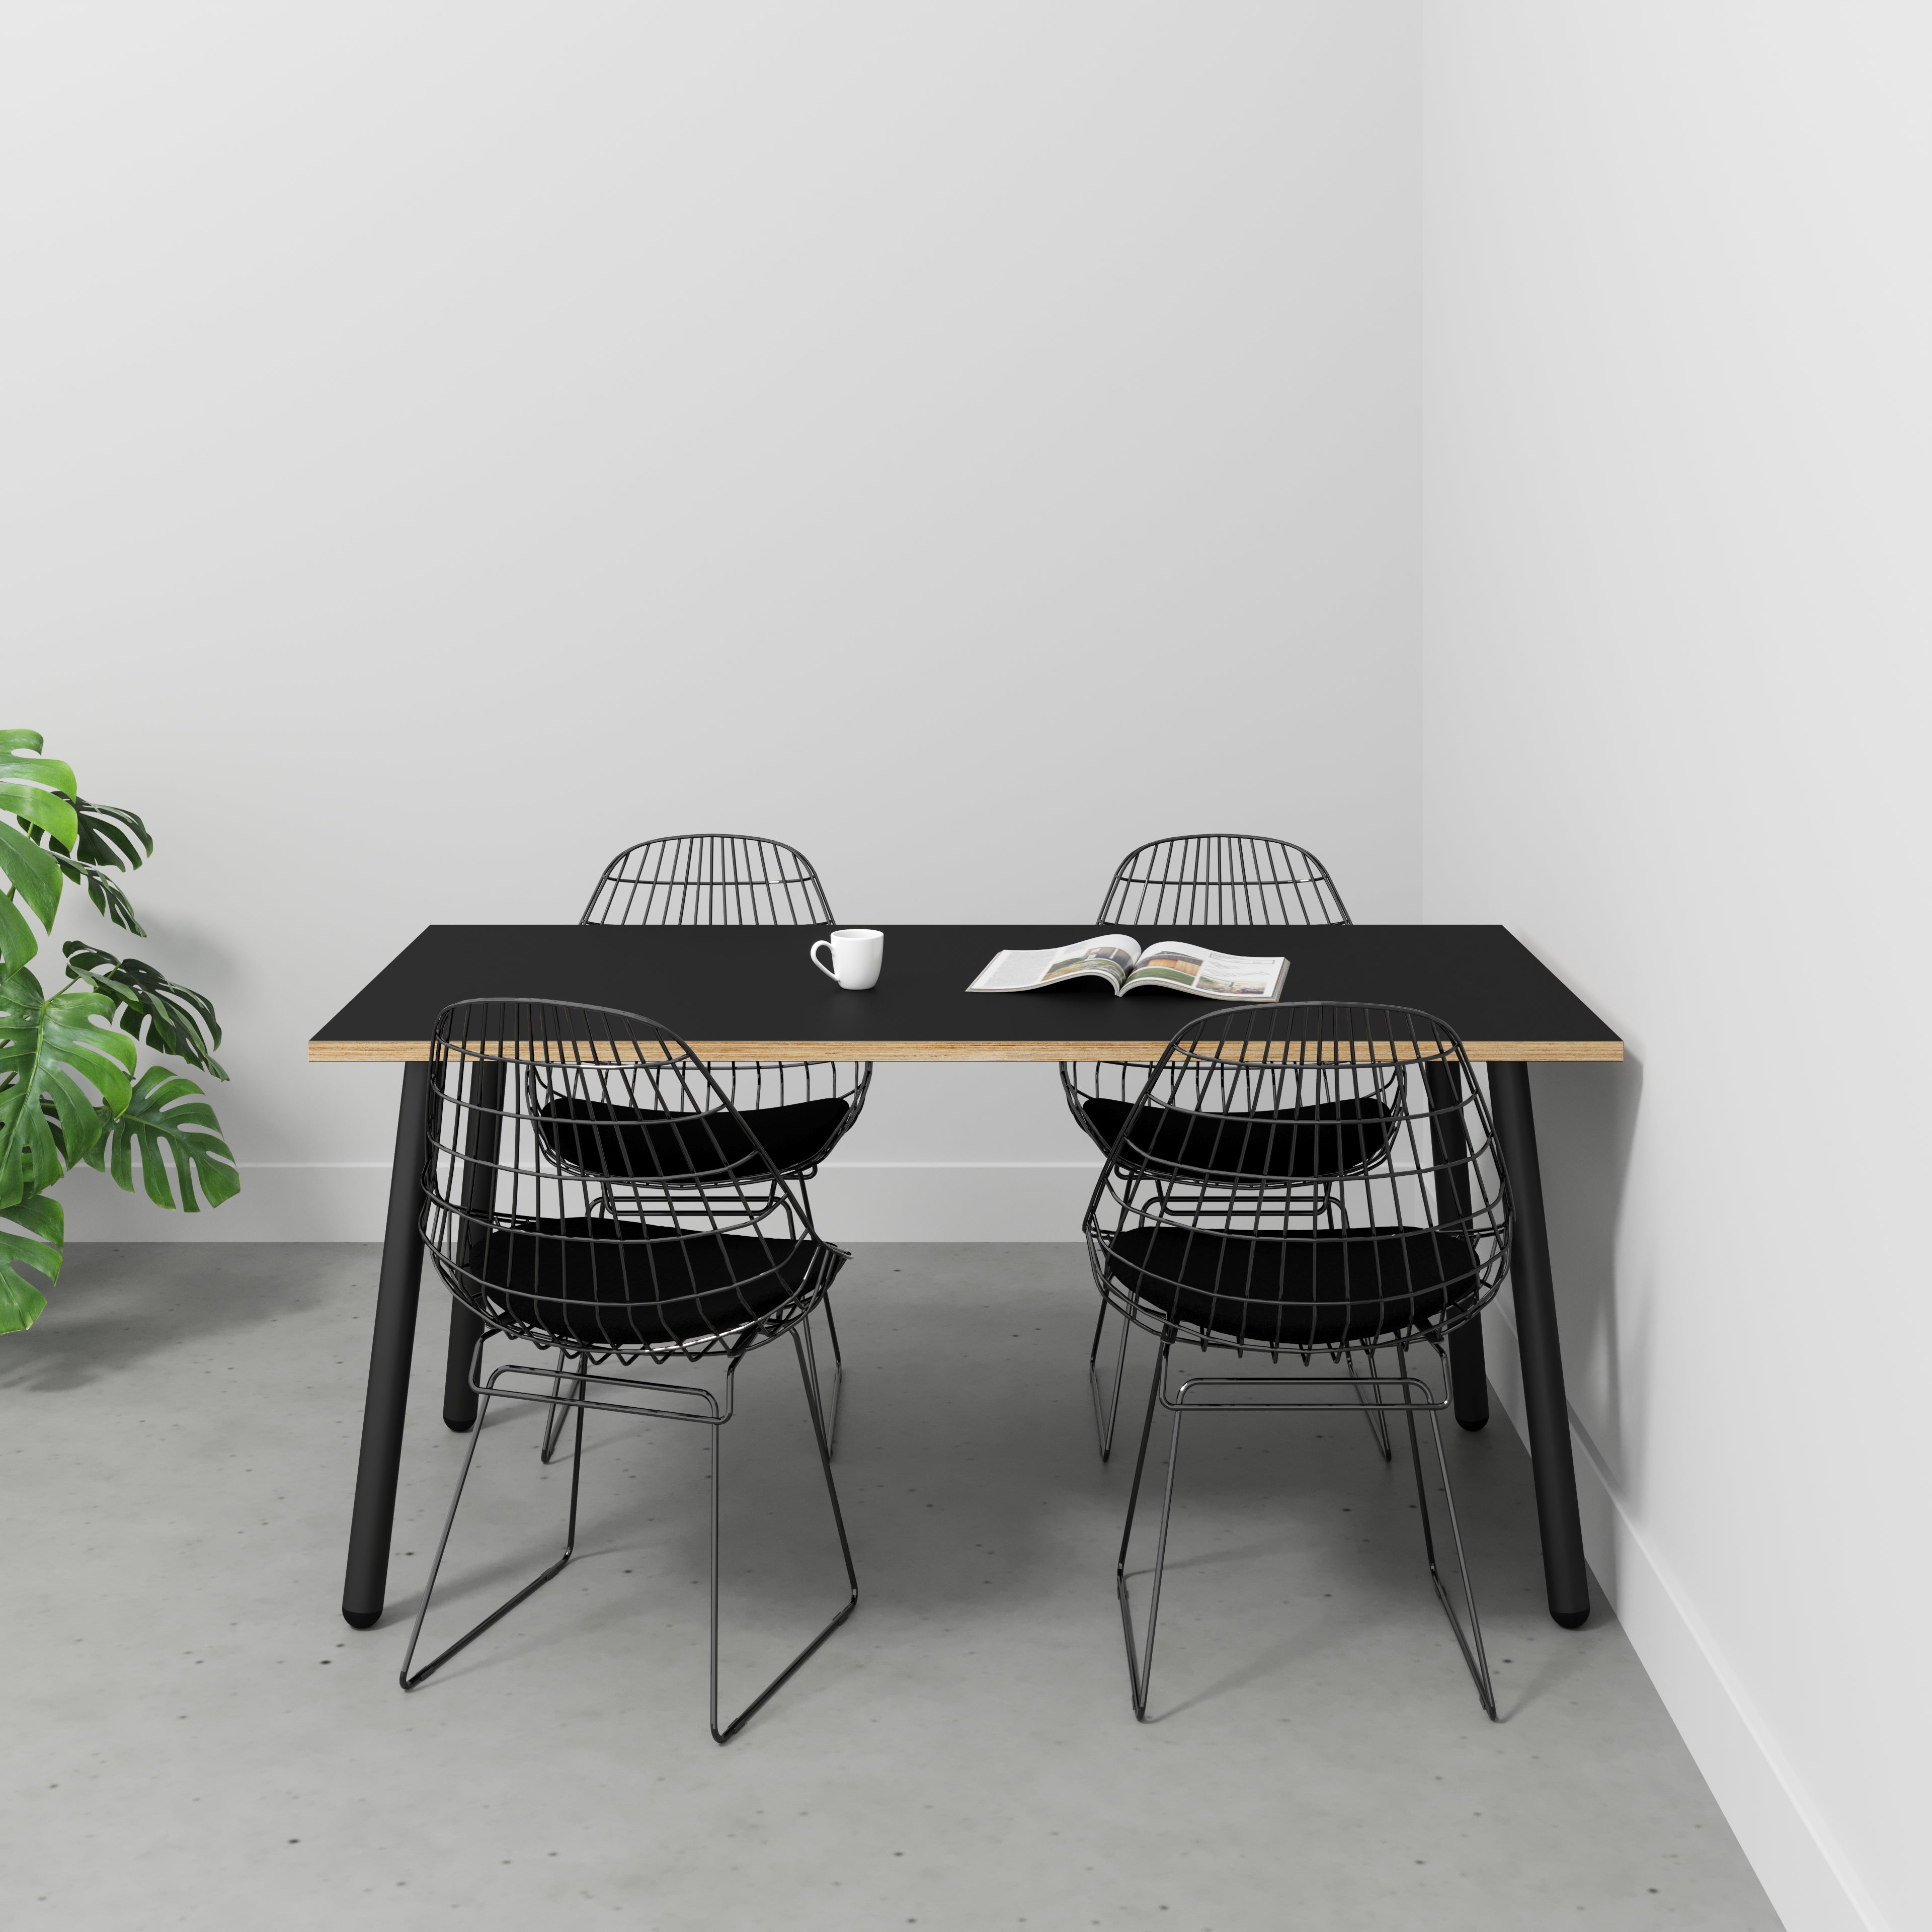 Table with Black Round Single Pin Legs - Formica Diamond Black - 1600(w) x 800(d) x 735(h)